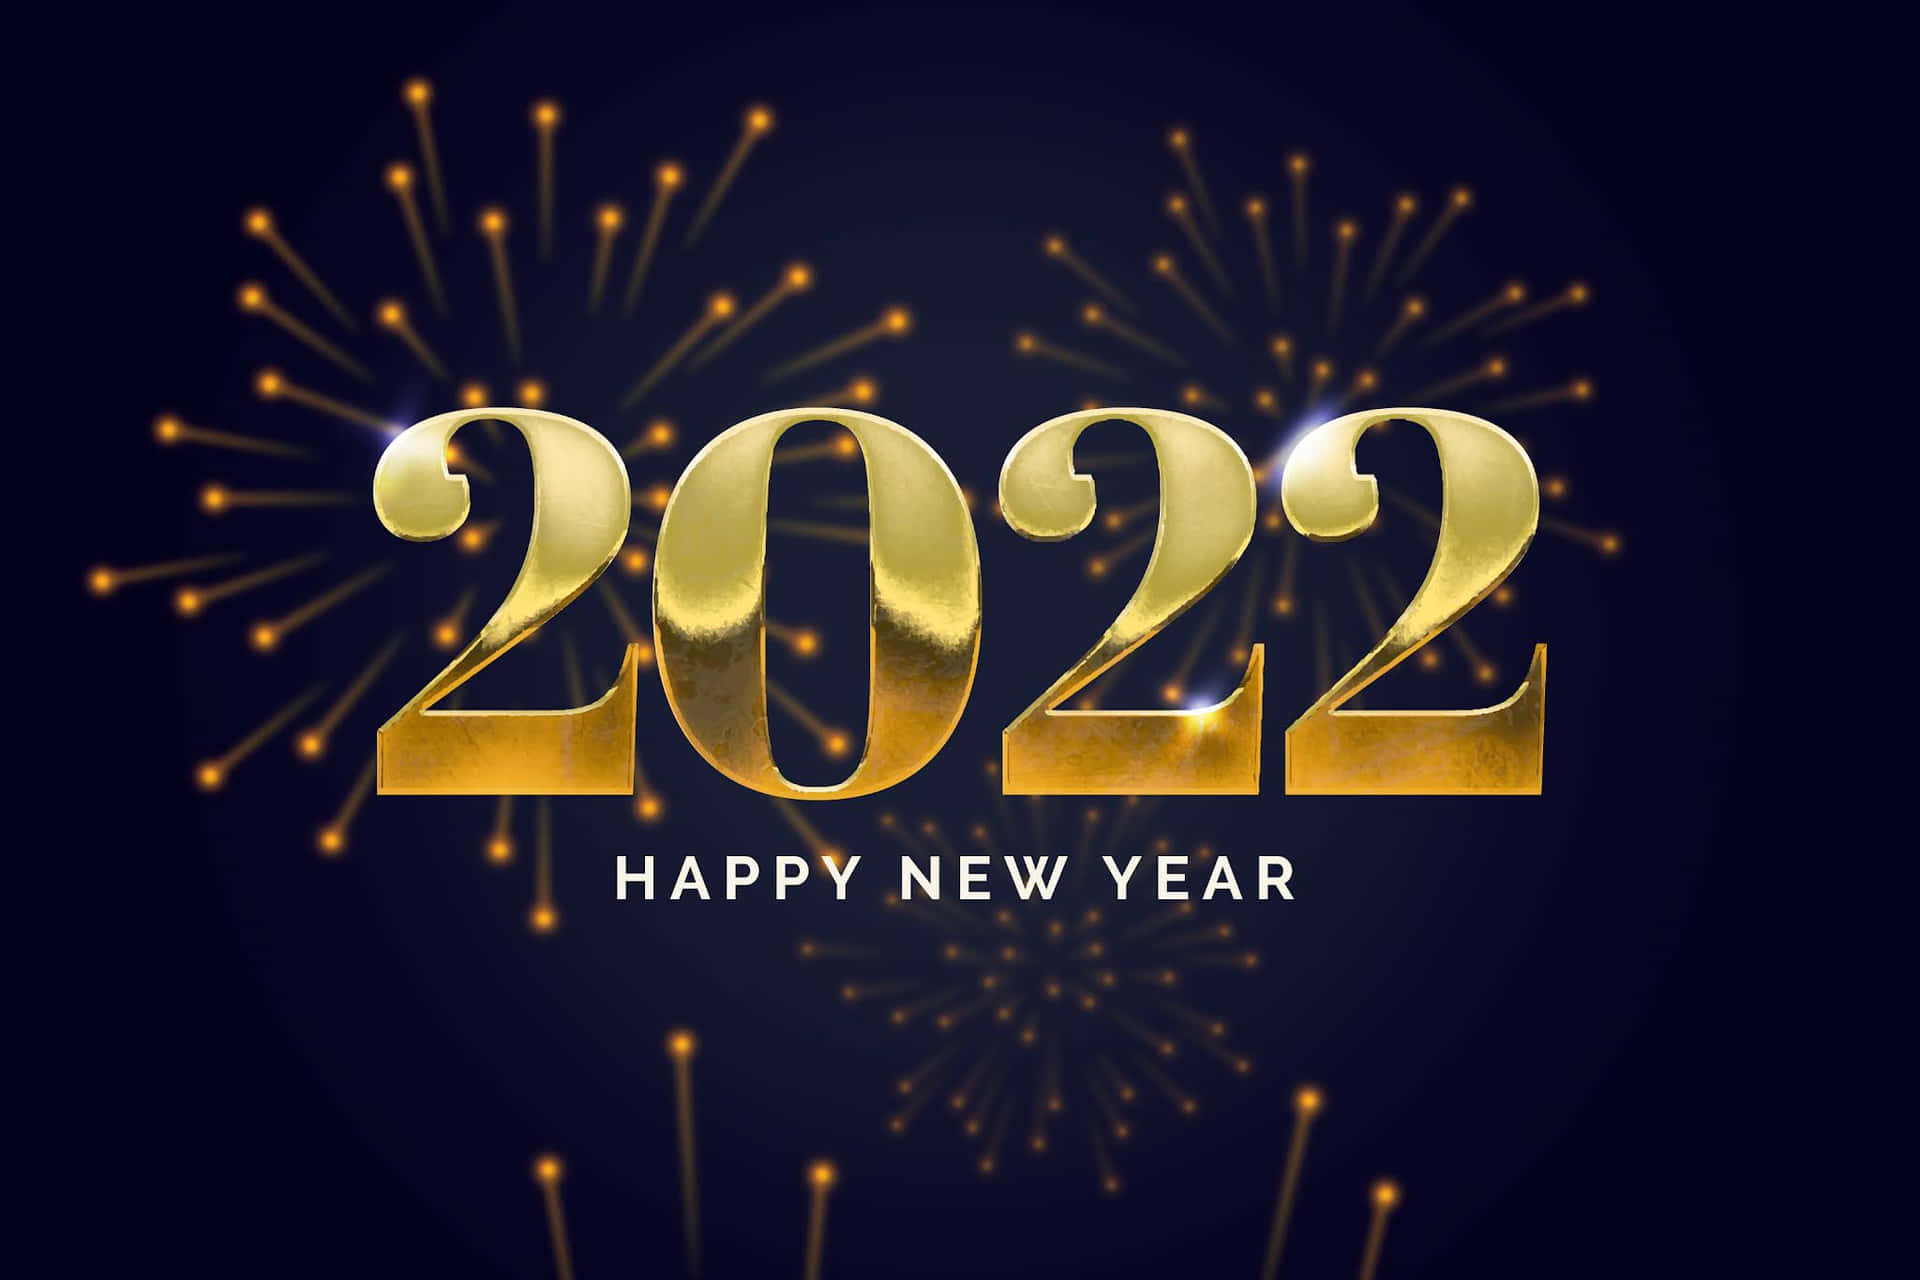 Get Ready To Celebrate - Happy New Year 2022